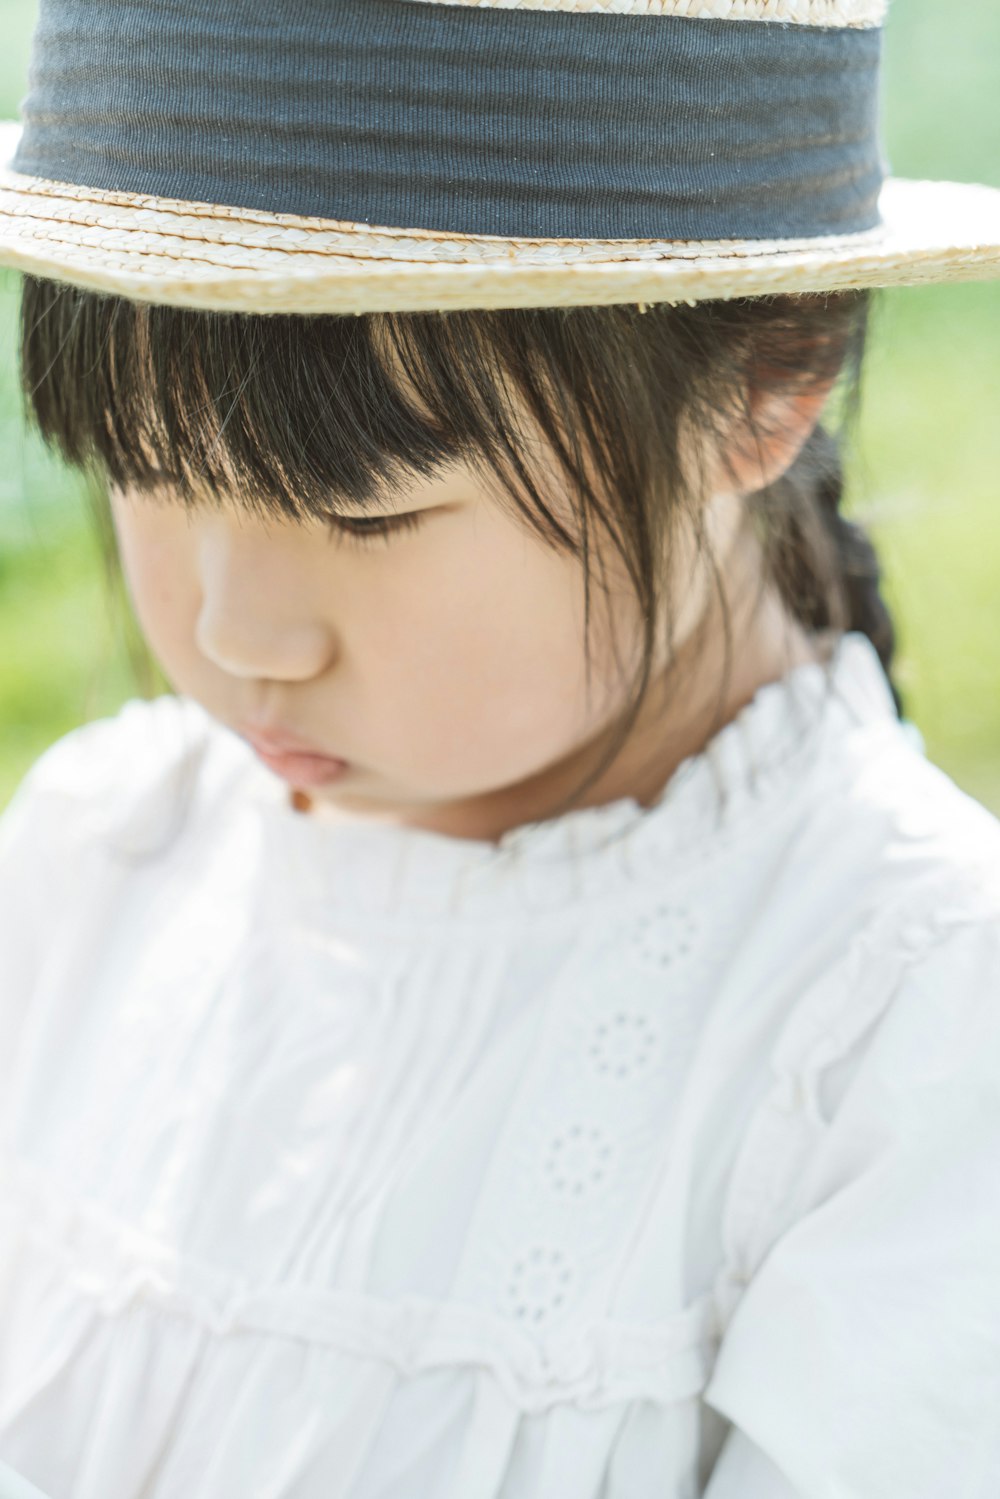 a little girl wearing a hat looking at a cell phone